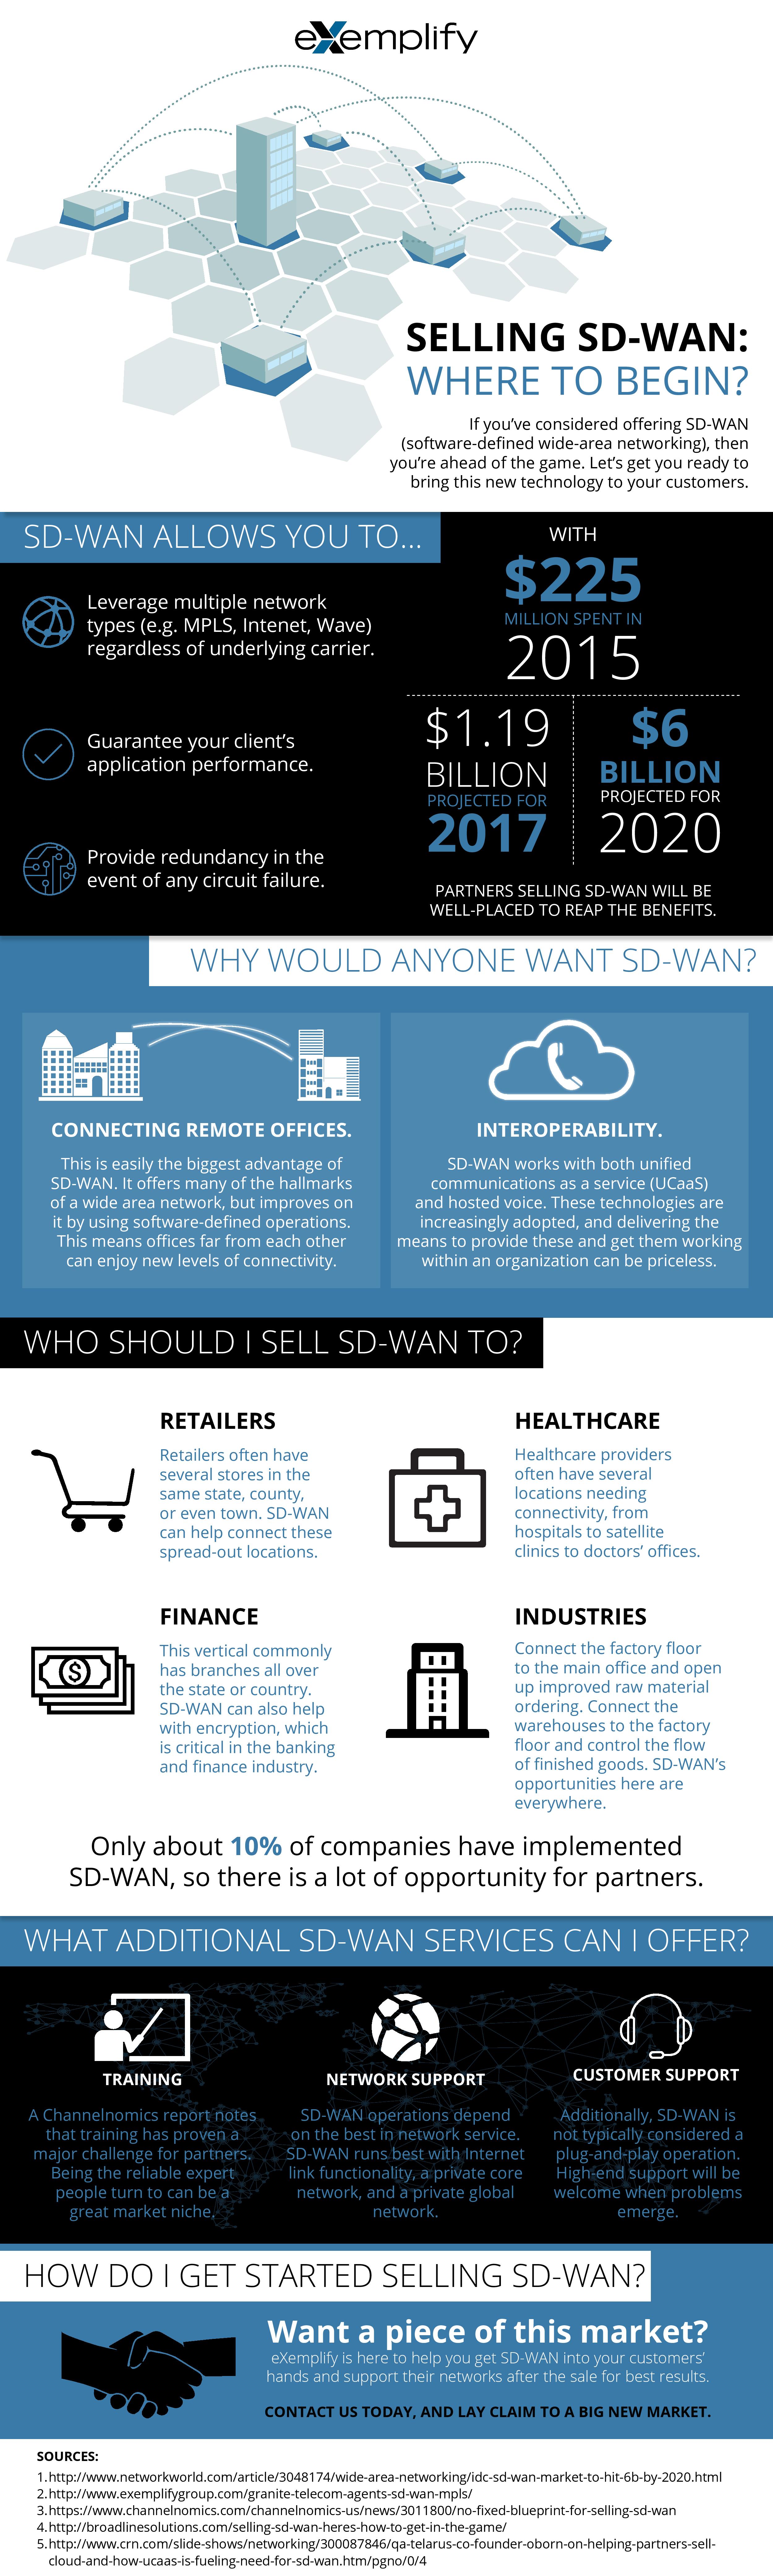 Selling SD-WAN: Where to Begin